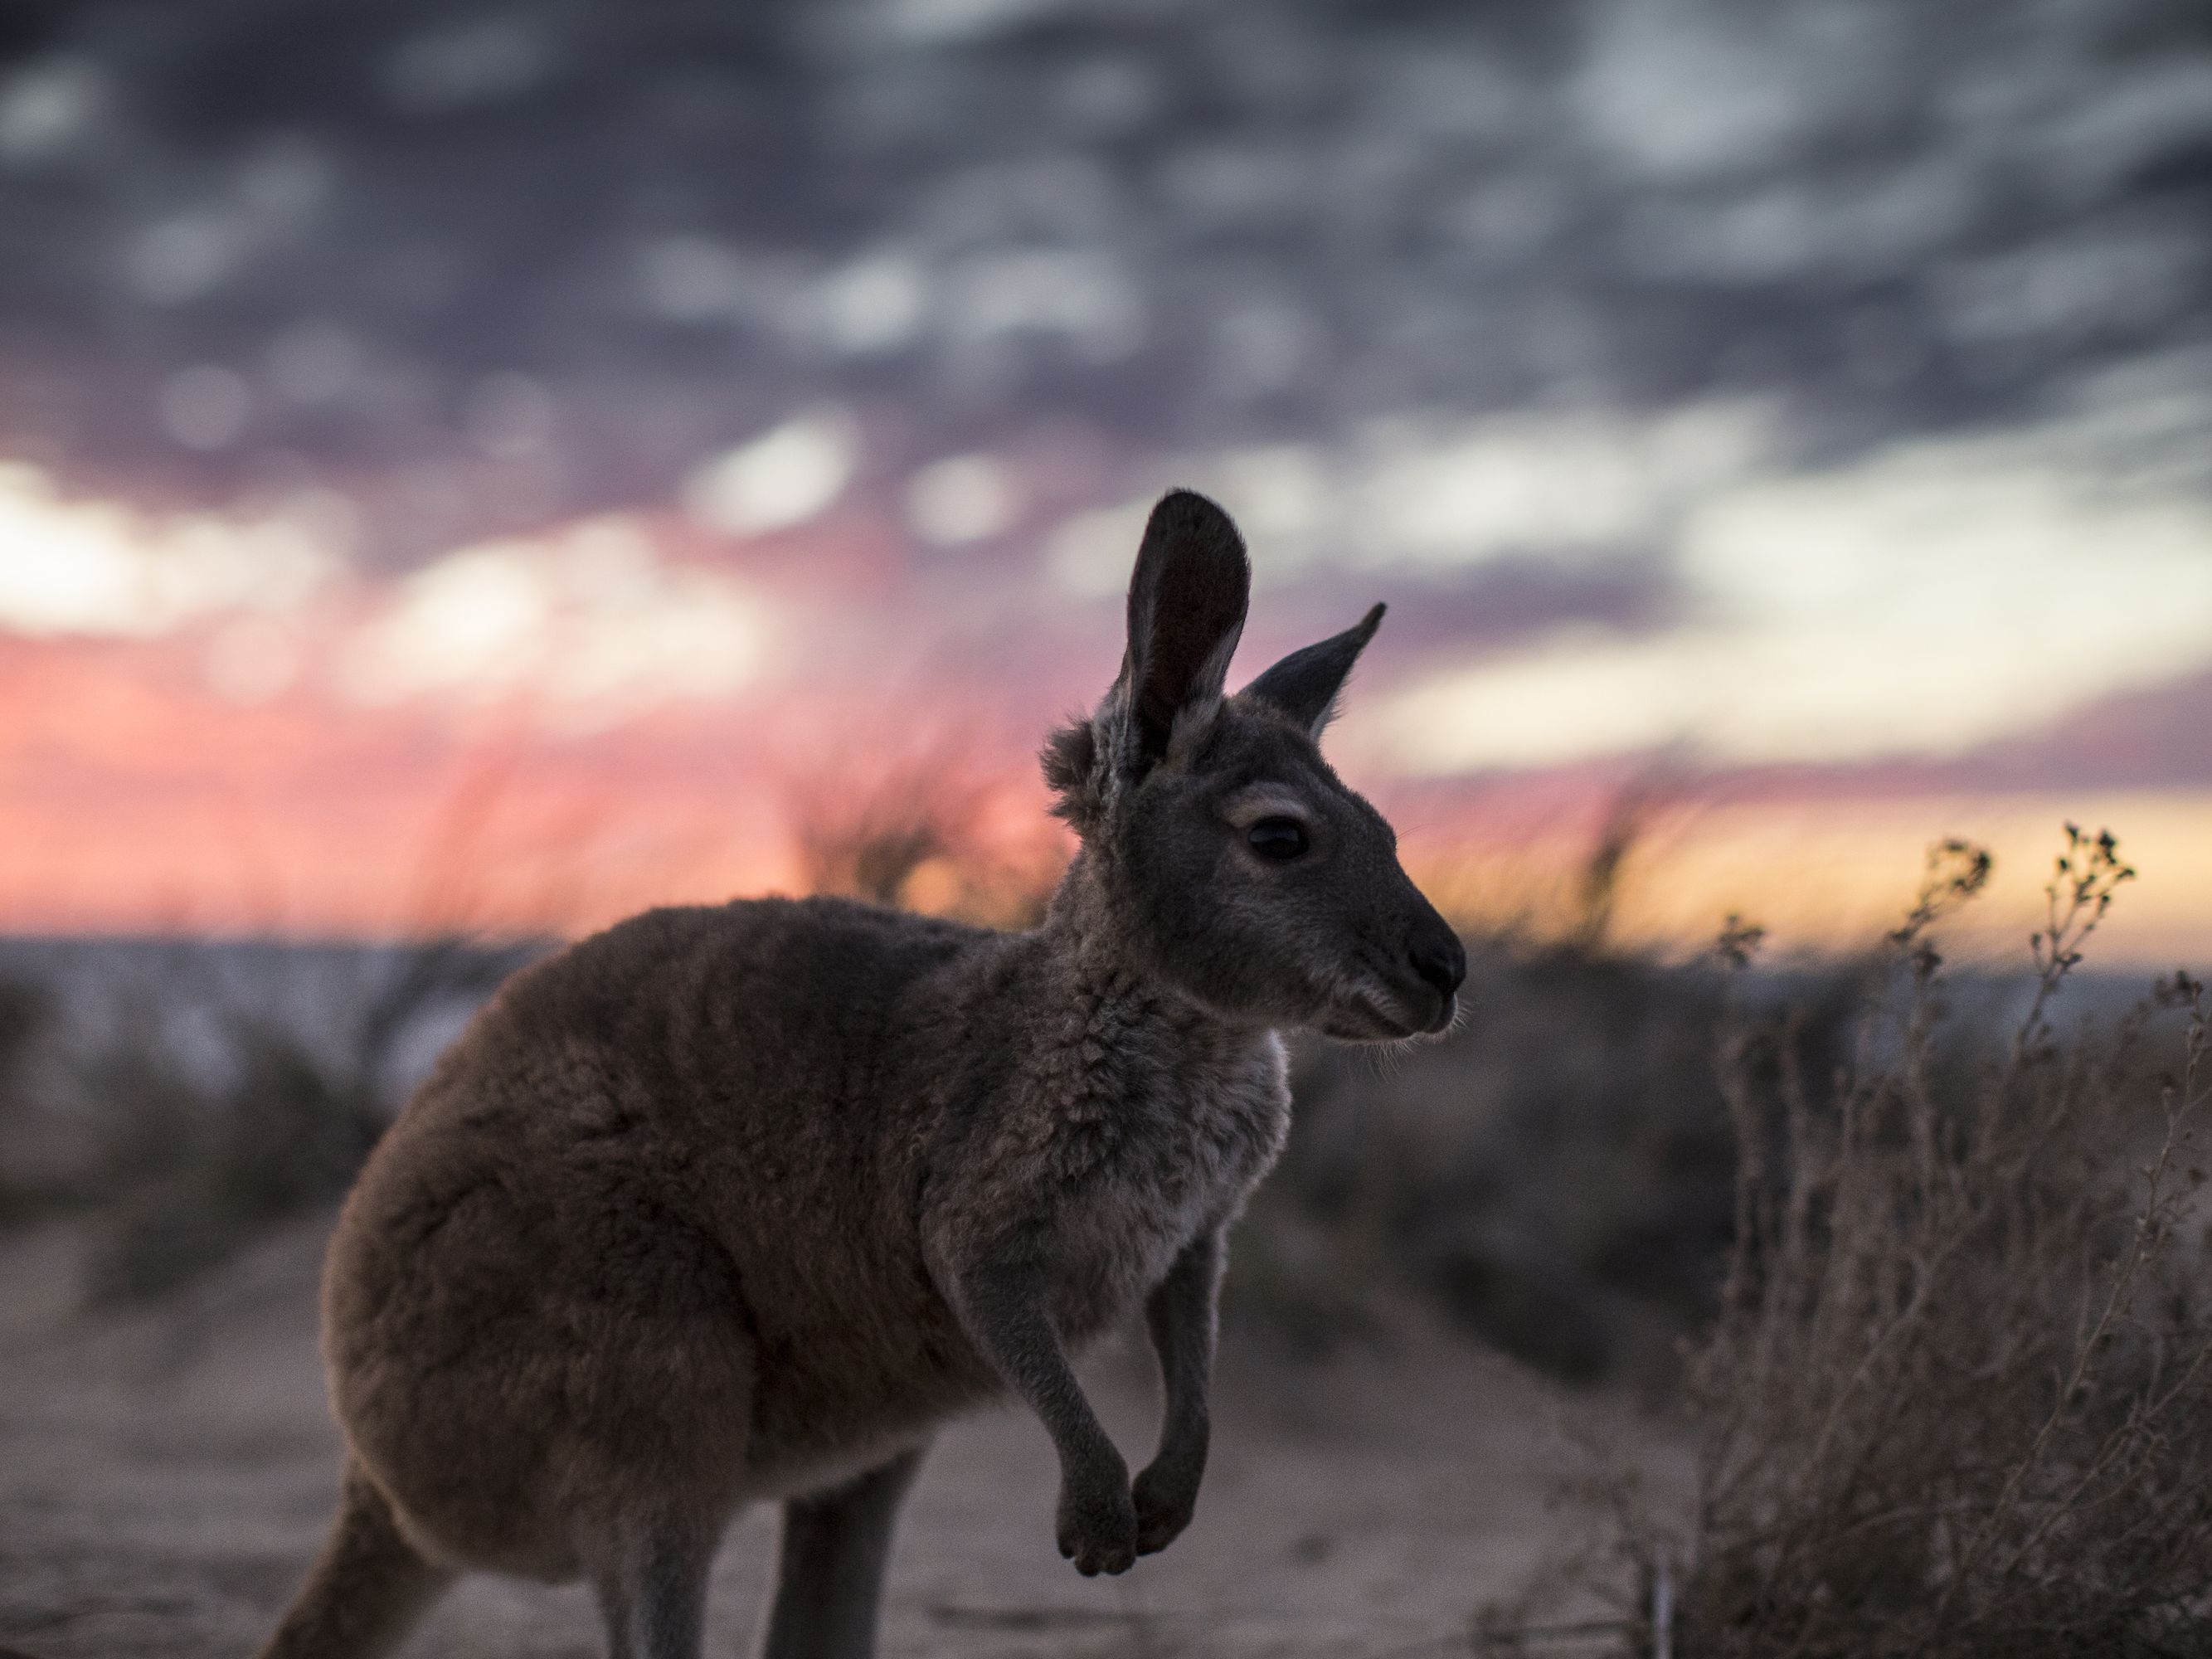 What are 5 interesting facts about kangaroos?